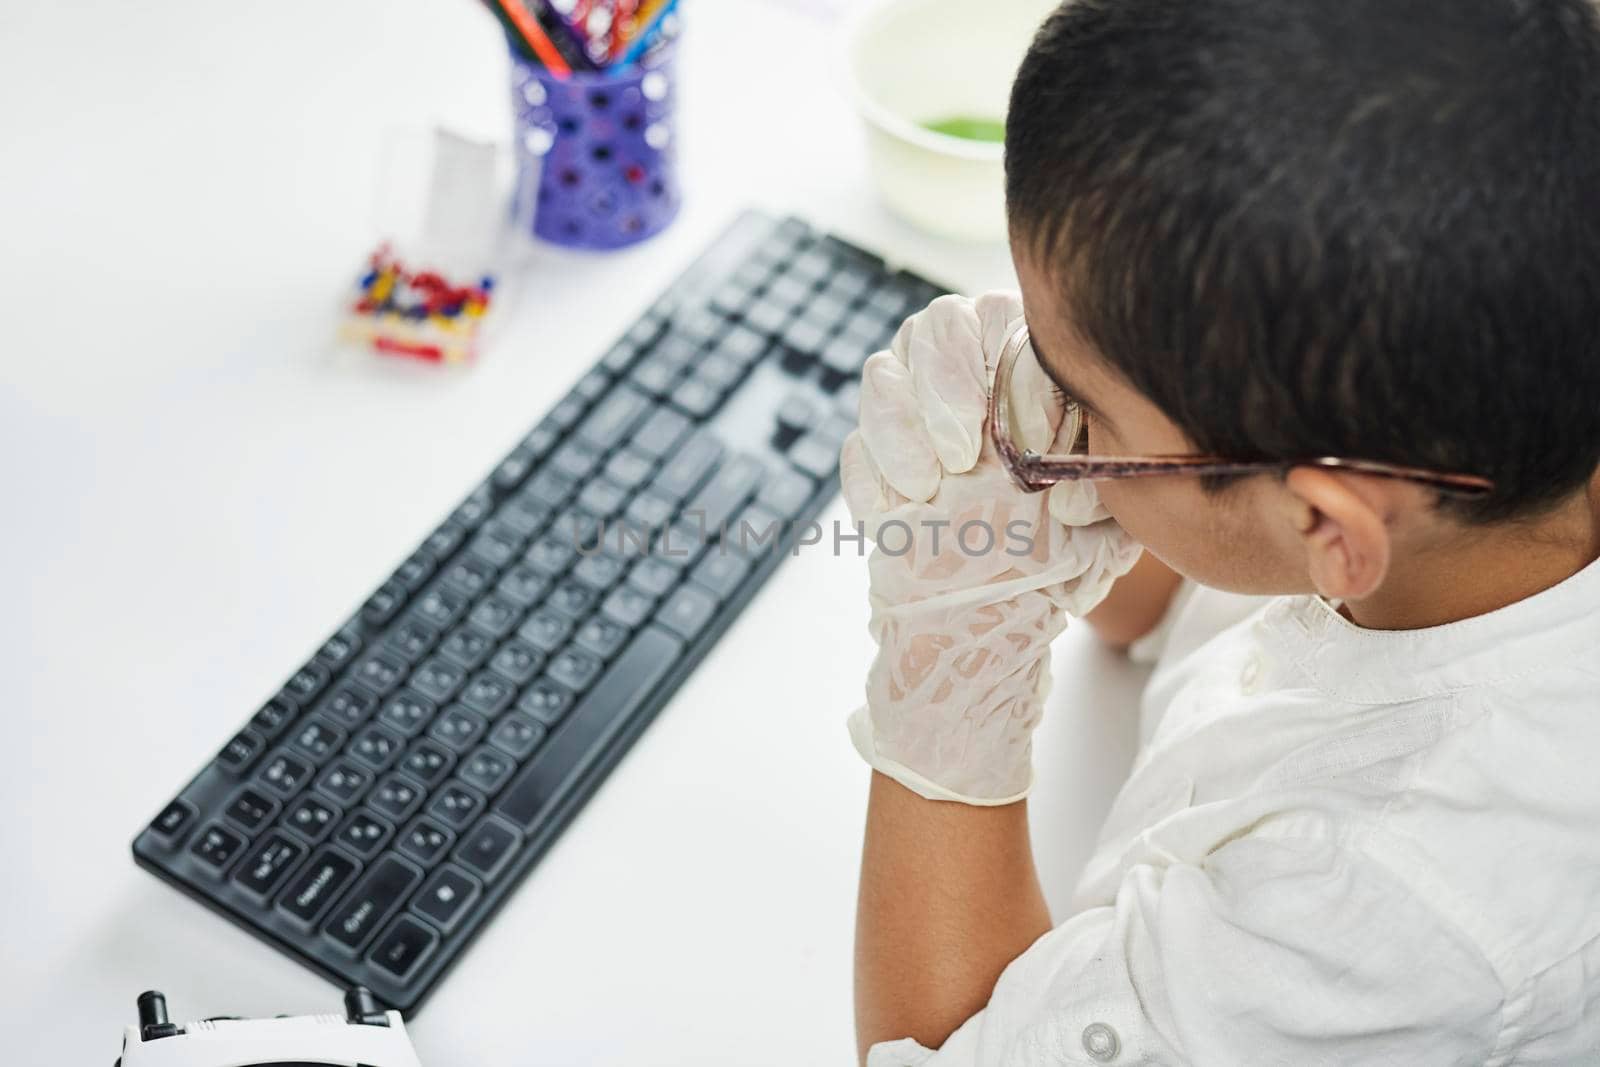 Rearview of a child sitting on the table and doing homework